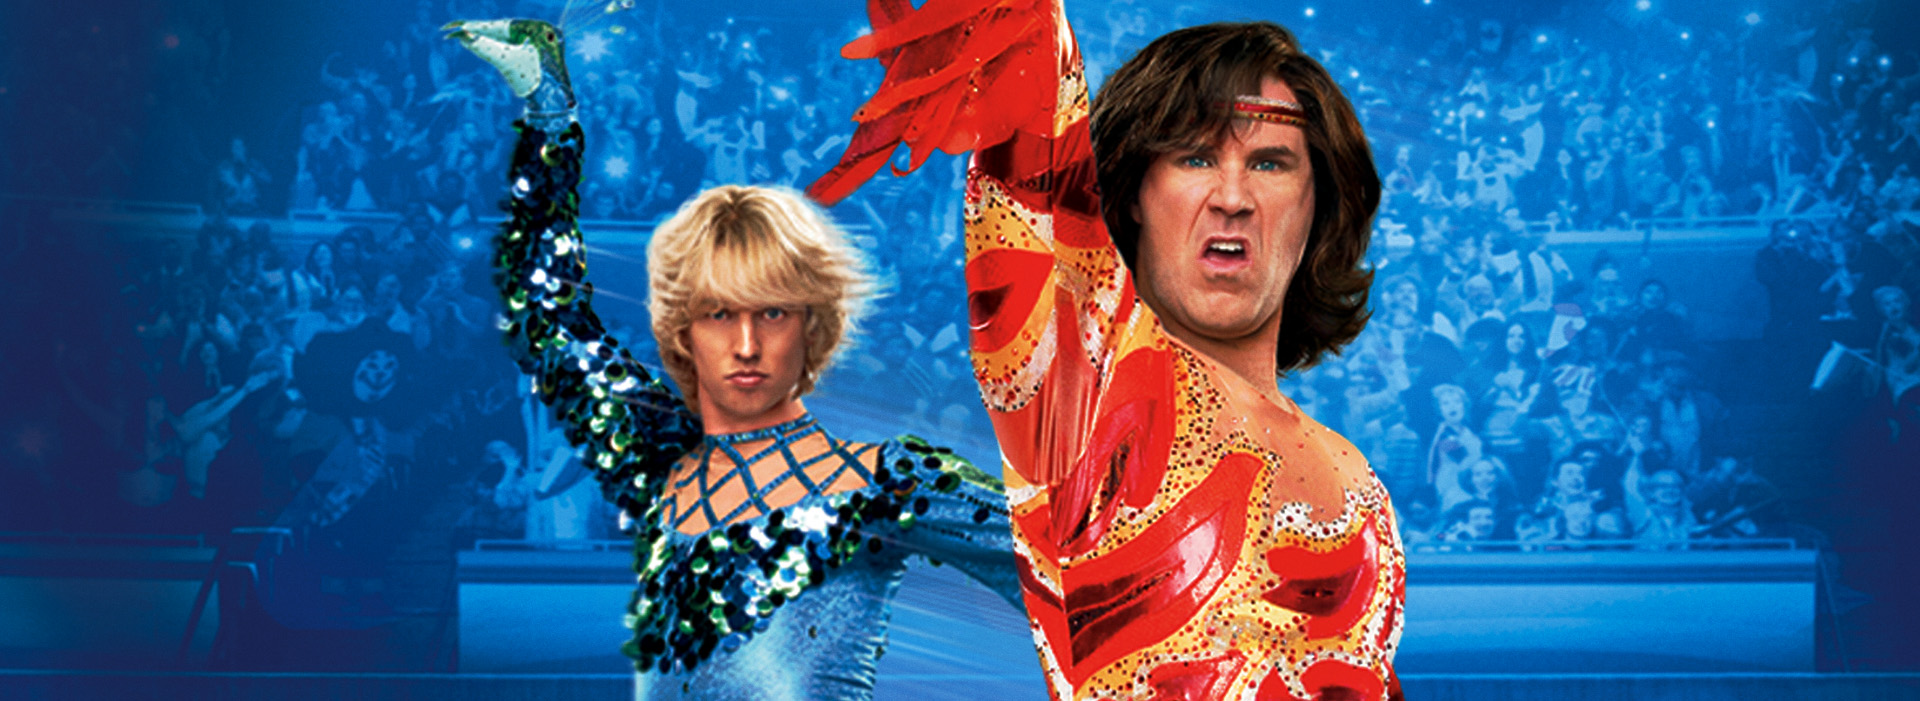 Movie poster Blades of Glory